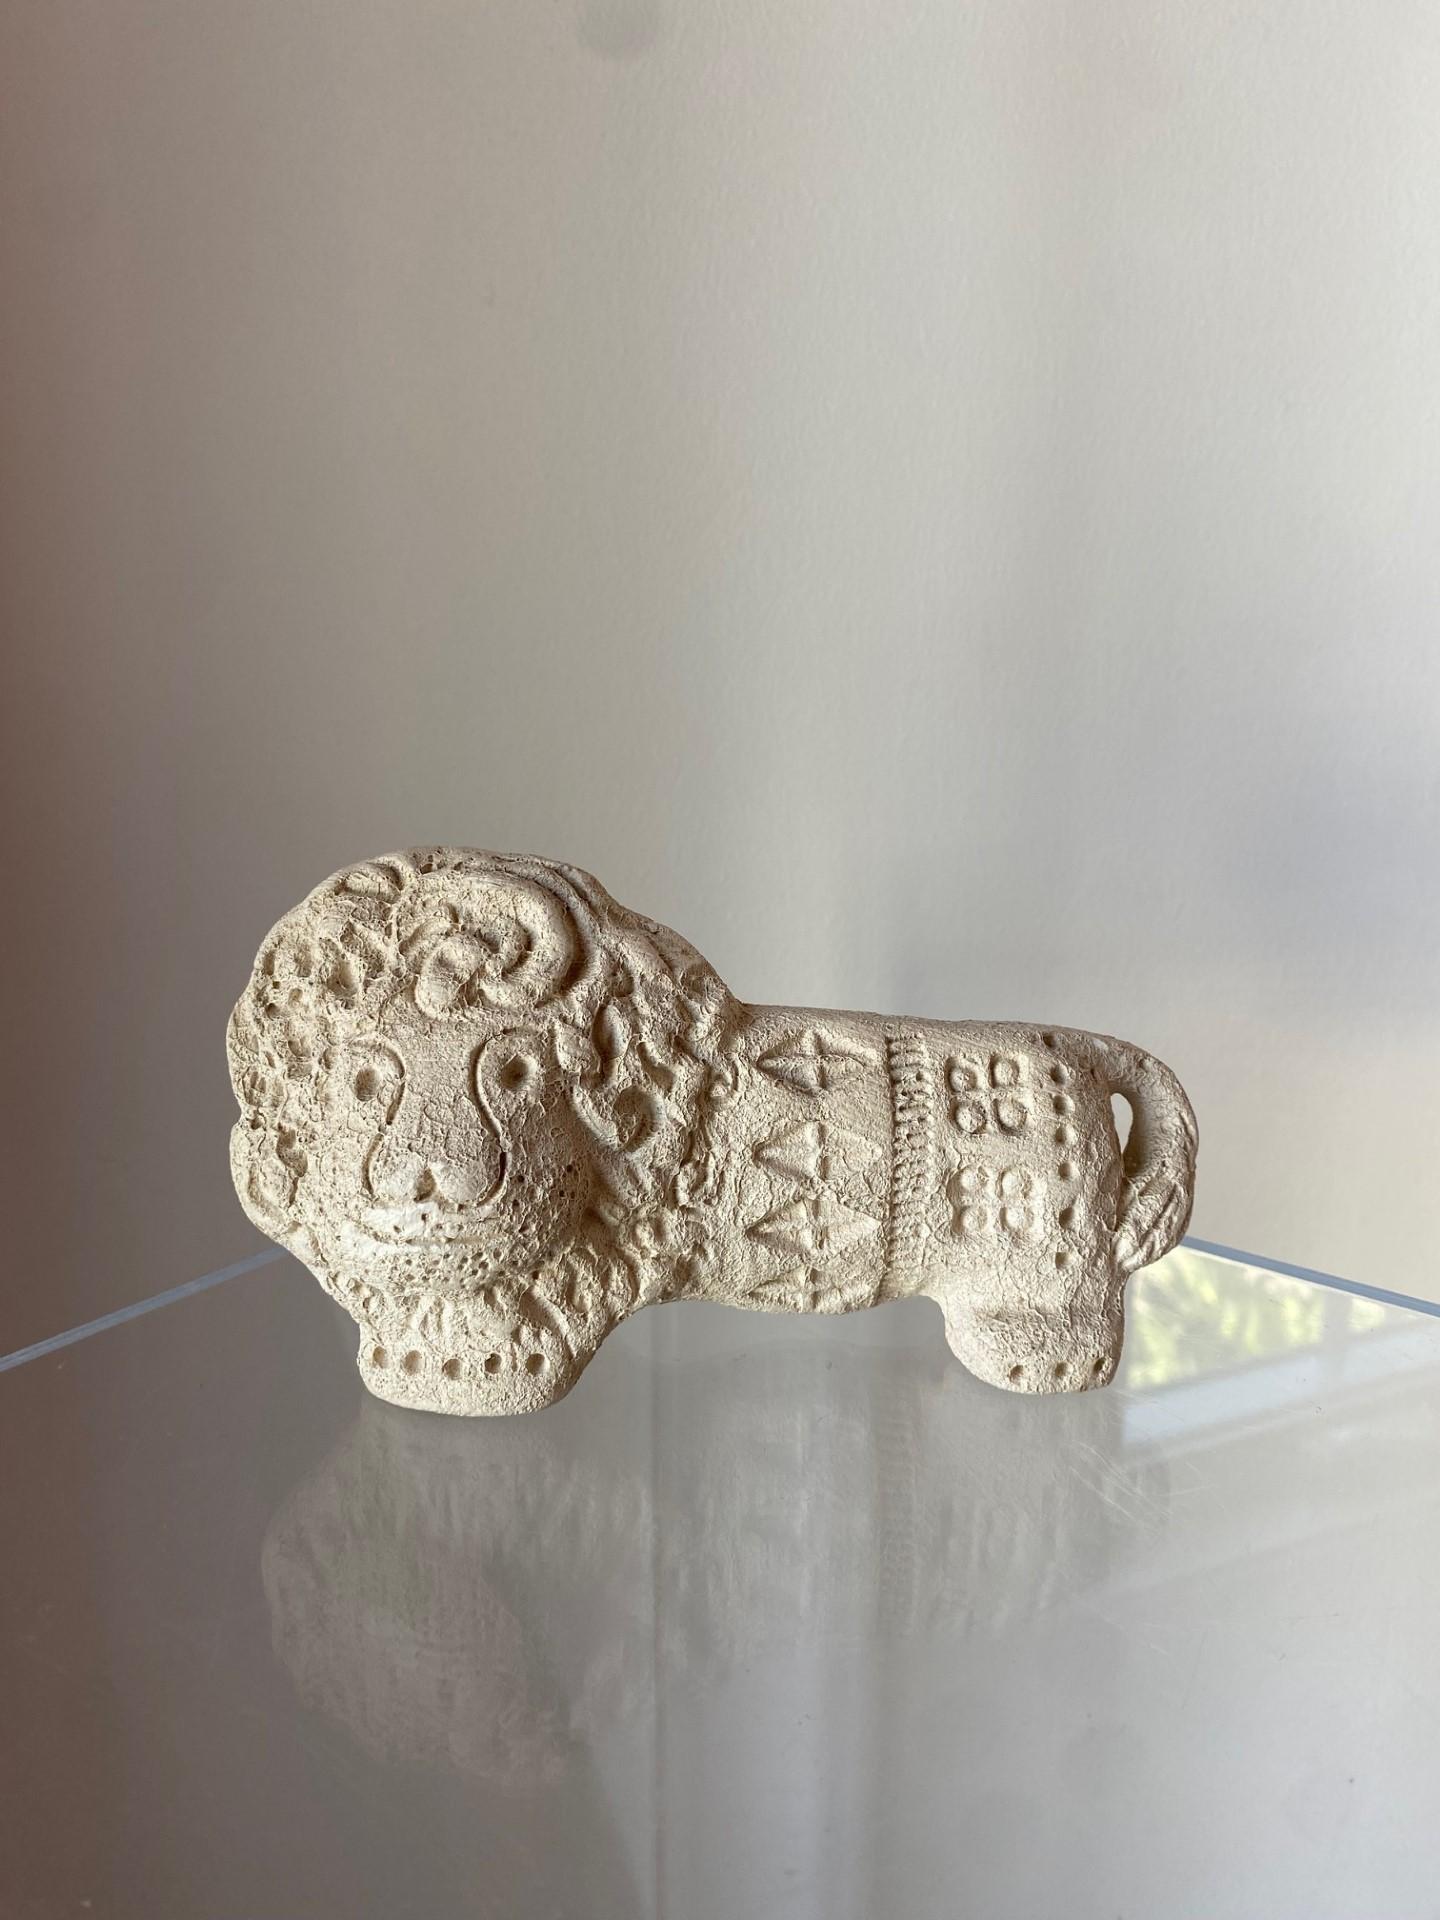 This vintage Flavia Montelupo Ceramic lion is a beautiful addition to any collection. Made in Italy by Aldo Londi (Bitossi), this unglazed figure showcases the intricate details of a playful lion. The ceramic material adds a touch of elegance to any